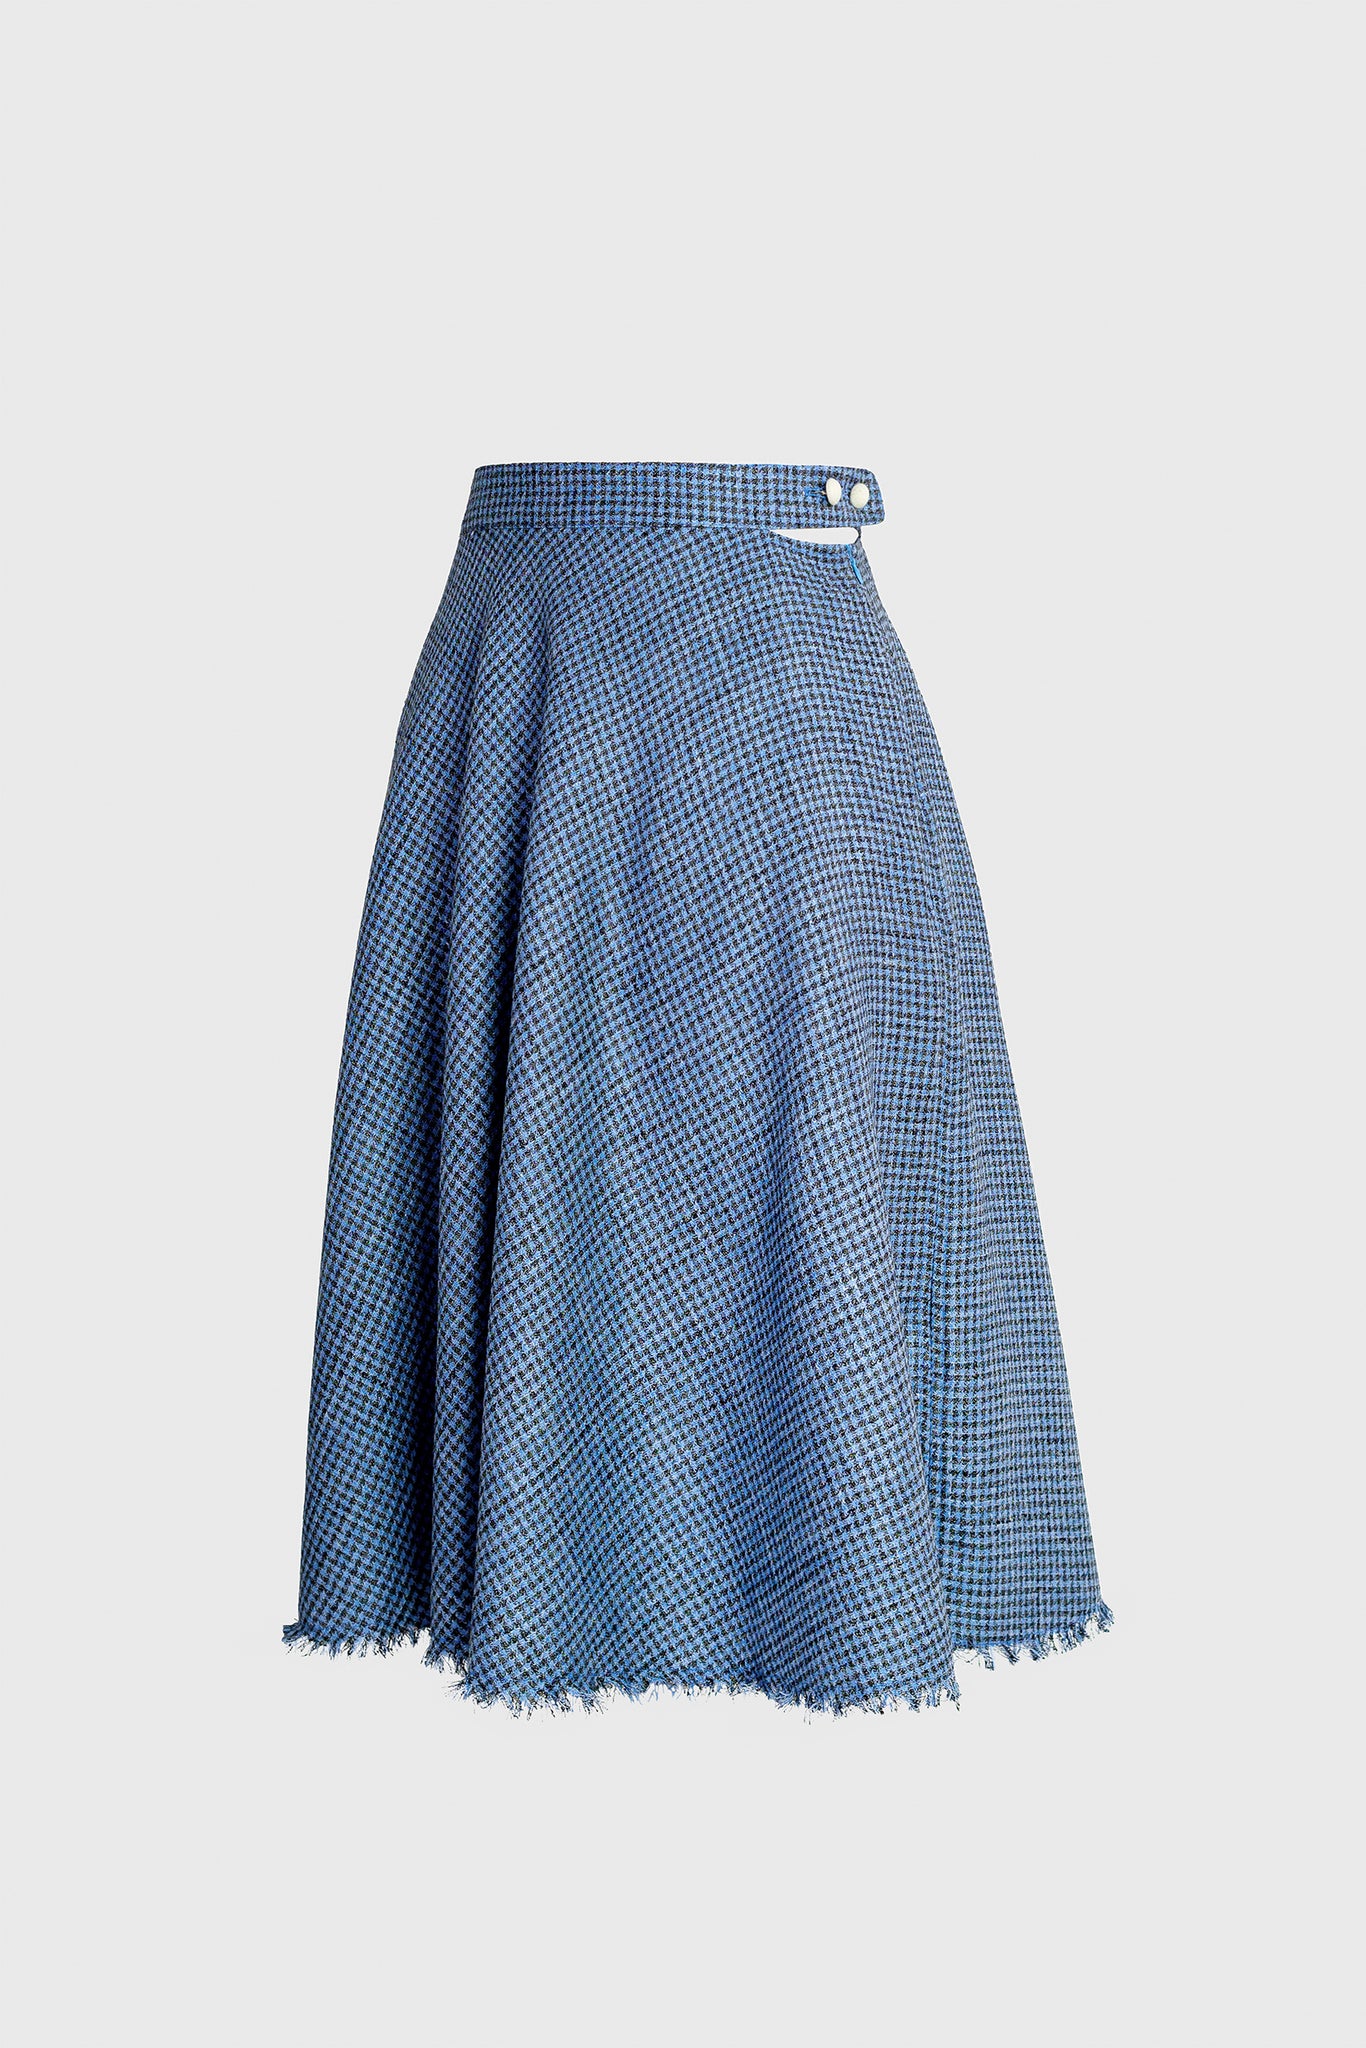 mid-length women's skirt, fringed hem line, side cutout showing skin, elongating your legs and body, emphasizing hips, silk and linen textile, subtle blue feeling